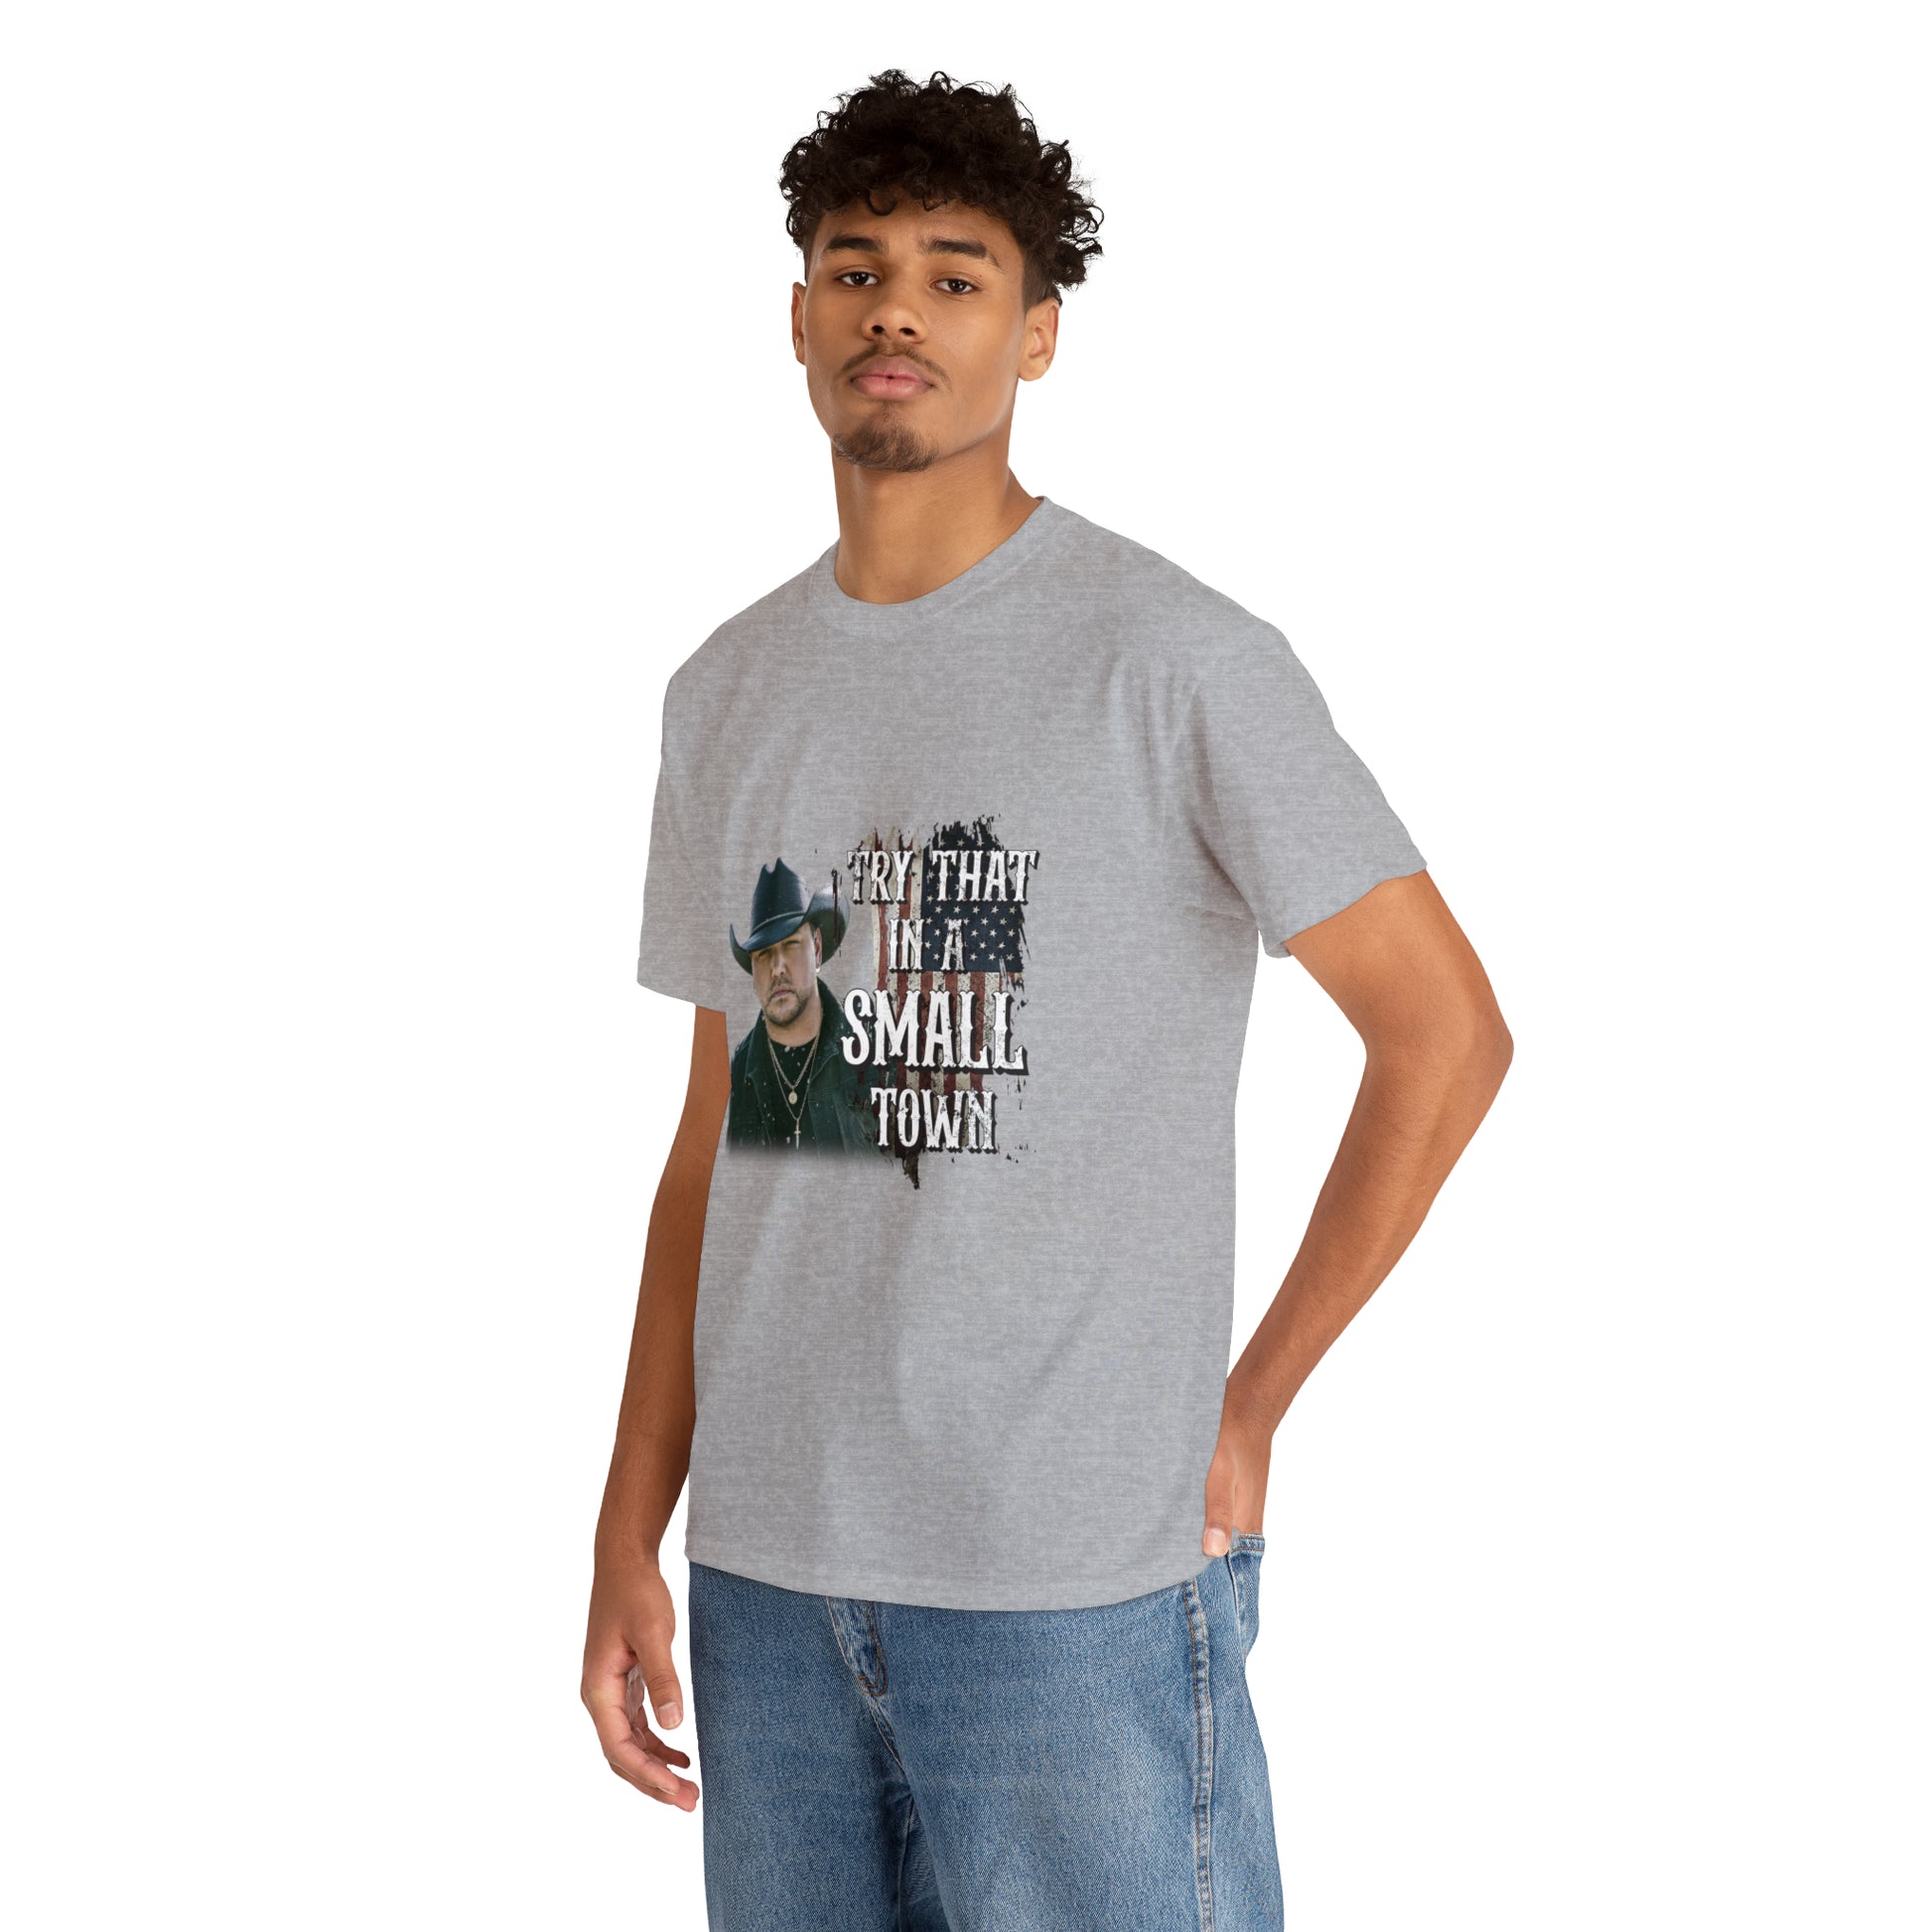 Try that in a small town Jason Aldean Unisex Heavy Cotton Tee